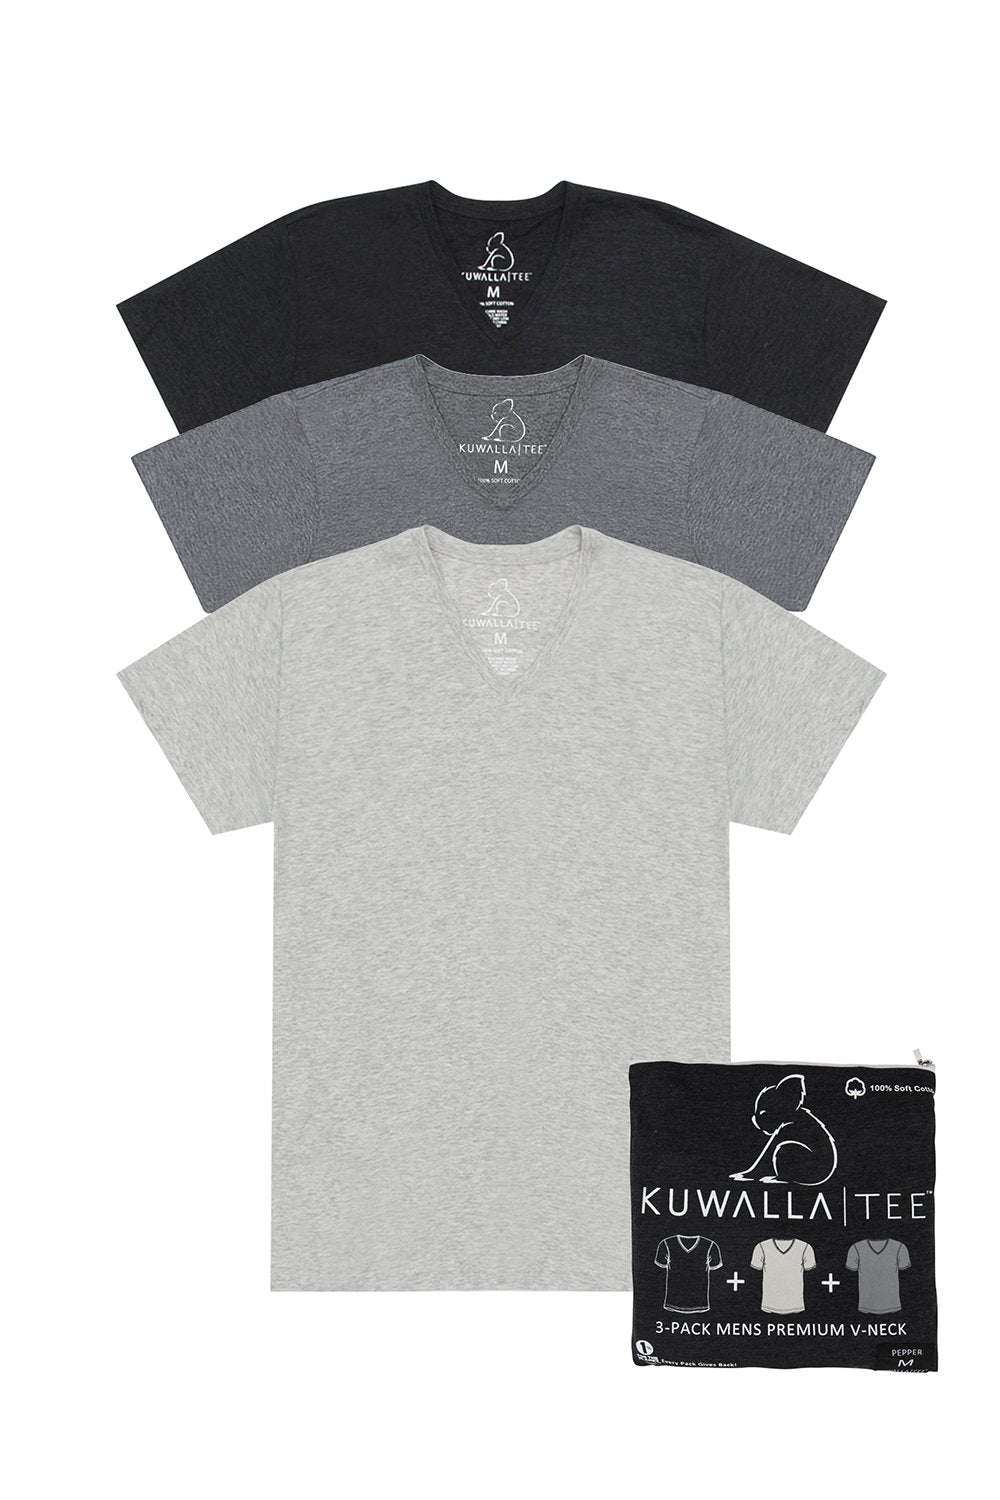 Kuwalla Tee 3-pack of t-shirts in shades of grey